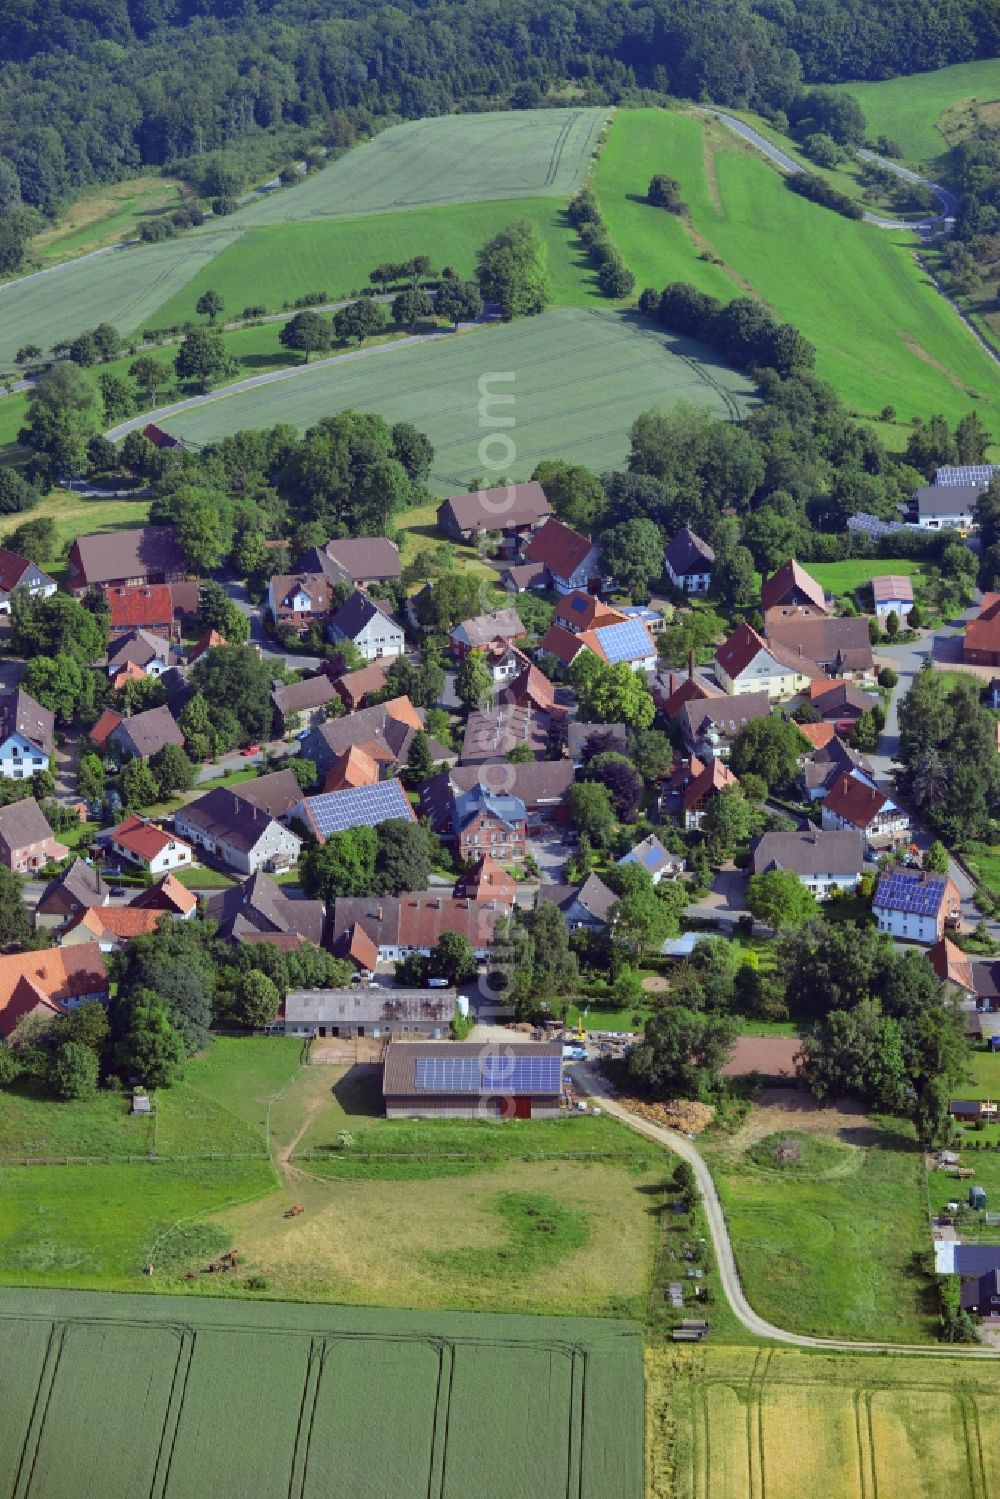 Aerial photograph Lichtenhagen - The hamlet of Lichtenhagen in the parish of Friedland in the county district of Göttingen in the state of Lower Saxony. The small town is one of 14 that build the congregation. It is one of the three highest located villages in the county district. It is located at the former inner-German border and was residential area of police and custom officers of the German border police and Federal Border Guard